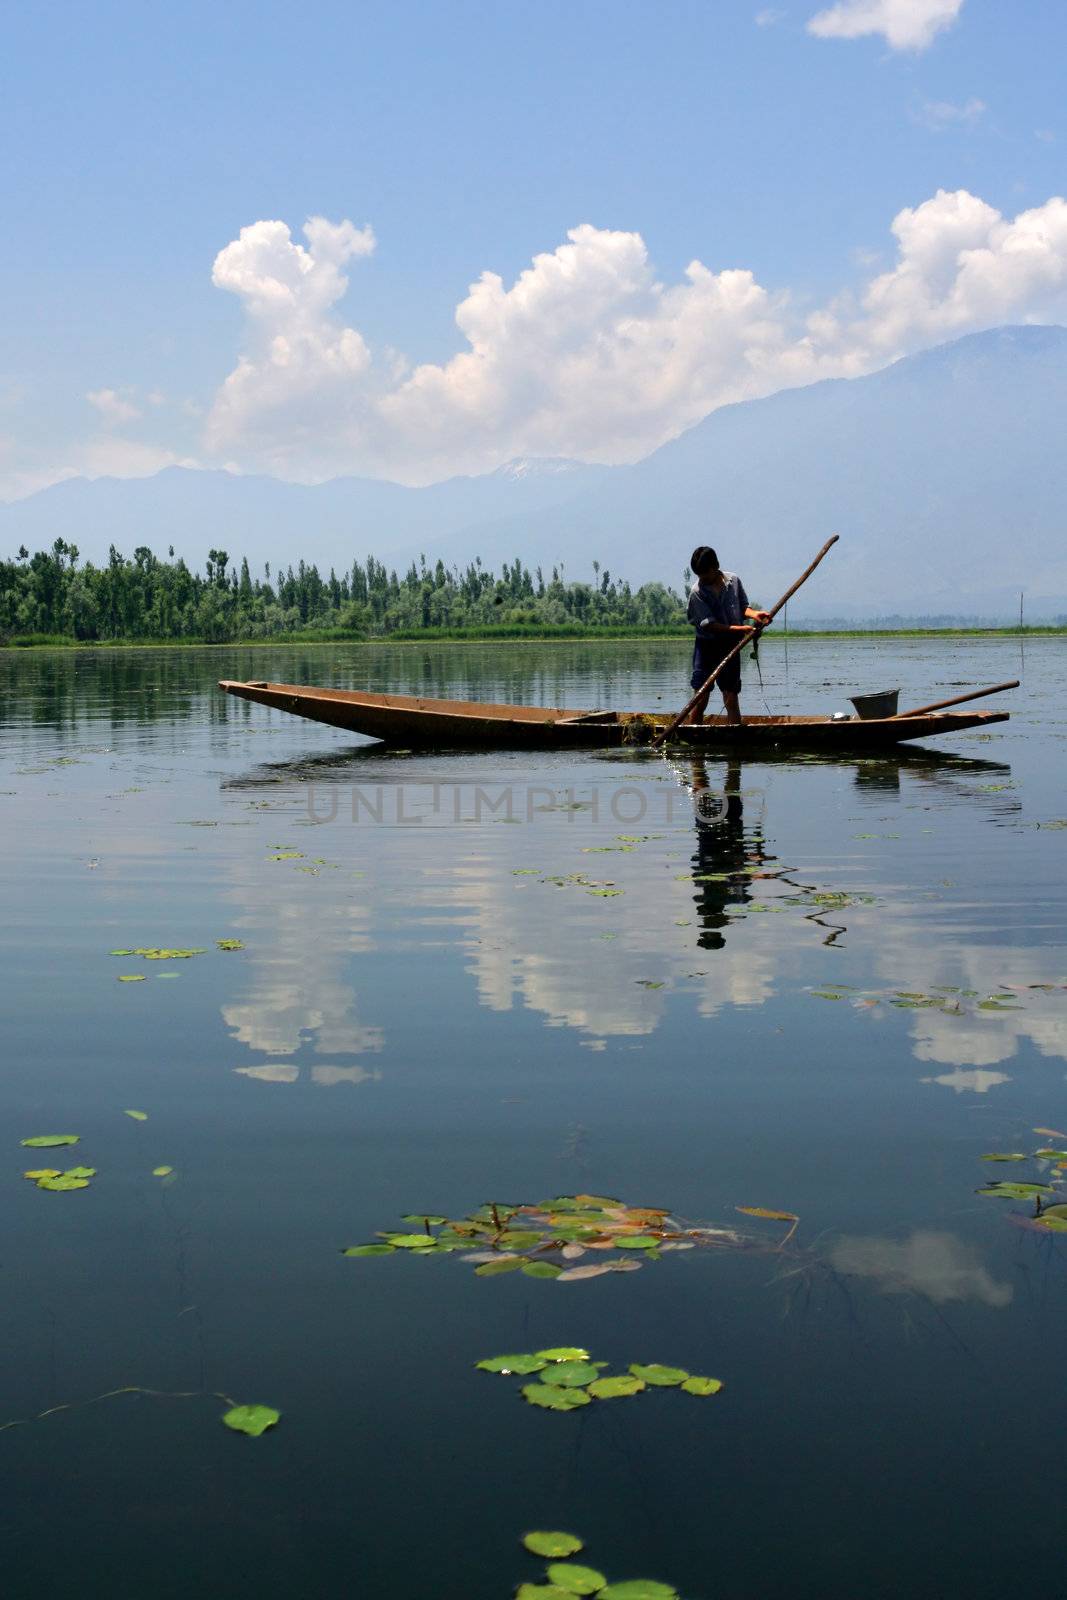 A young boy in Kashmir, India collecting grass off the bottom of a lake for agriculture.
